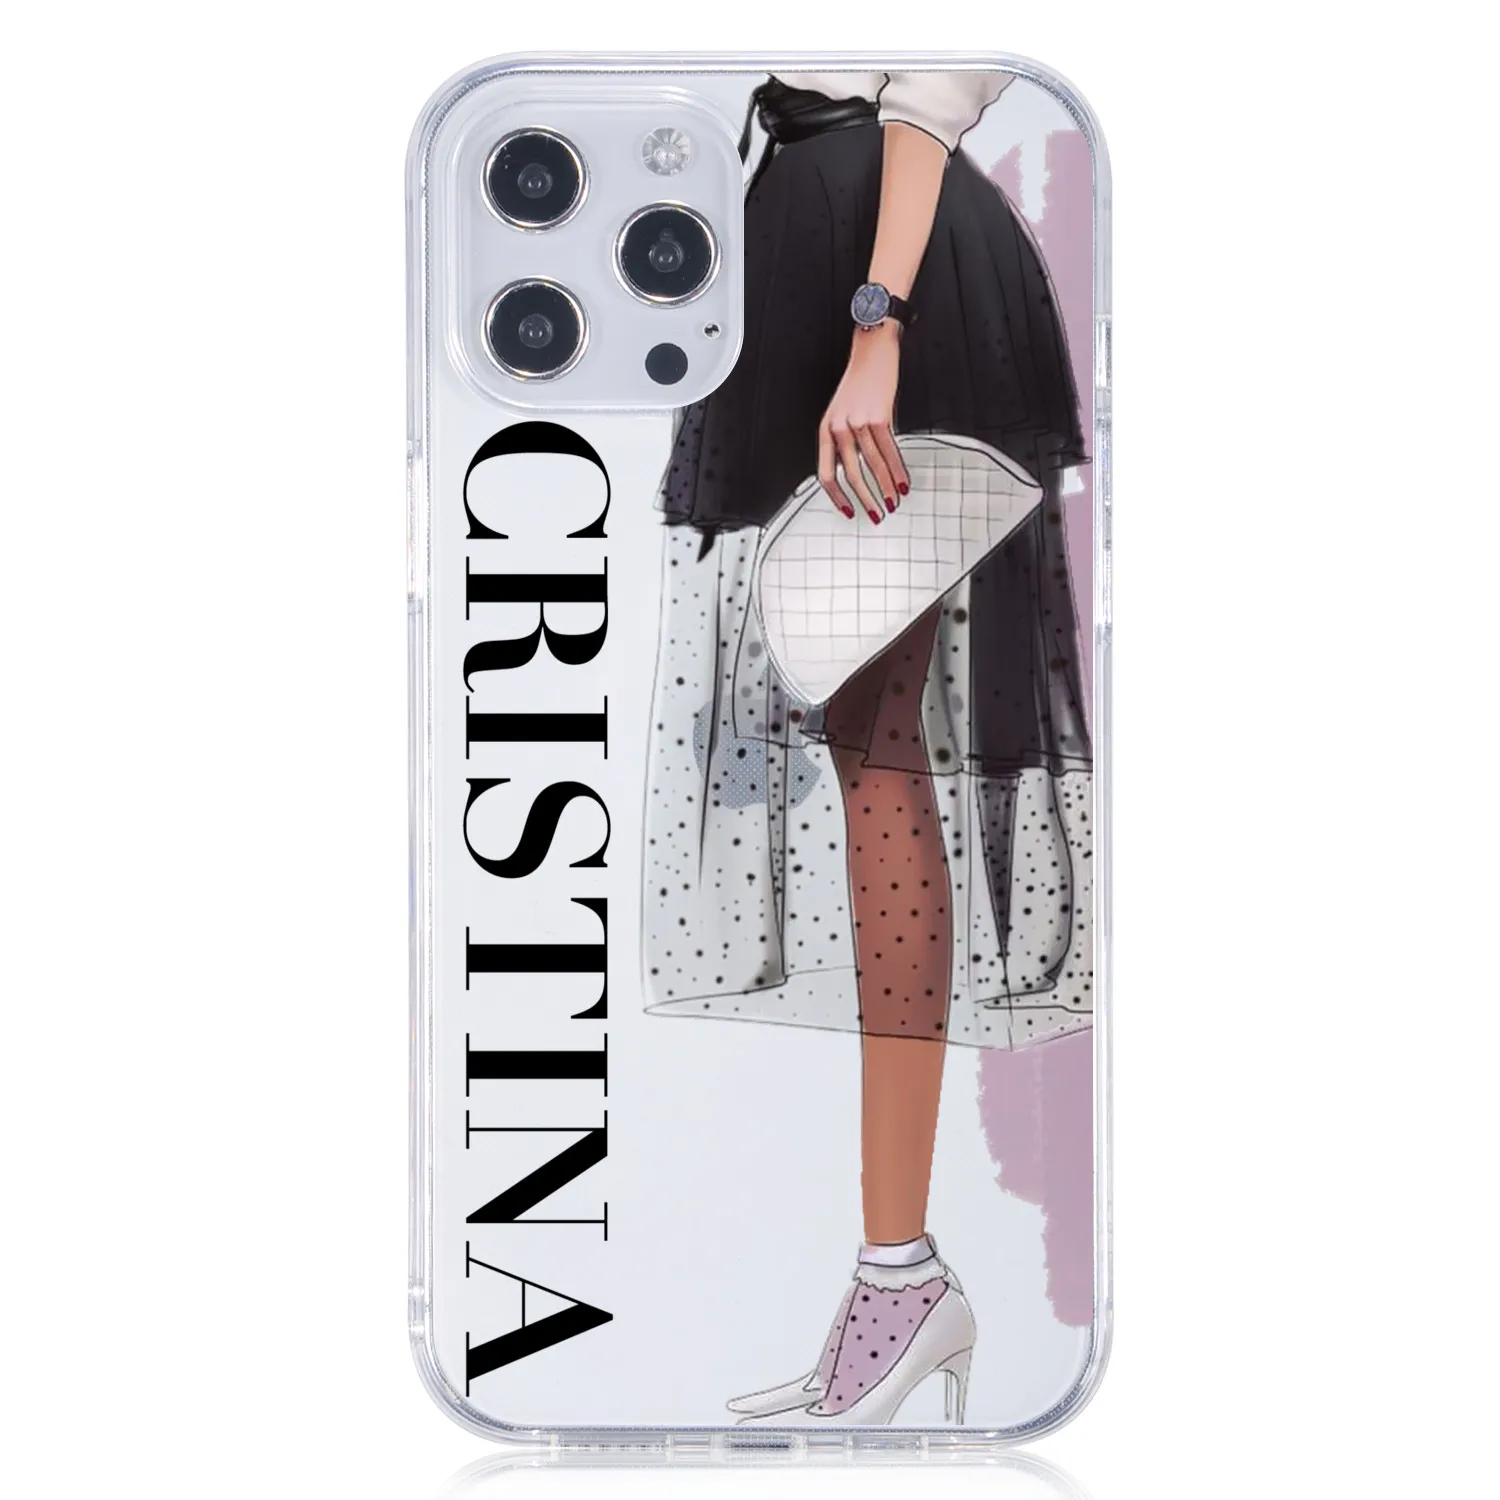 phone card case Fashion Girls Custom Name Phone Case for iPhone 13 Pro Max Case Cute 11 12 Mini SE 2020 7 8 Plus Luxury Cover for iPhone 13 X XR mobile pouch Cases & Covers